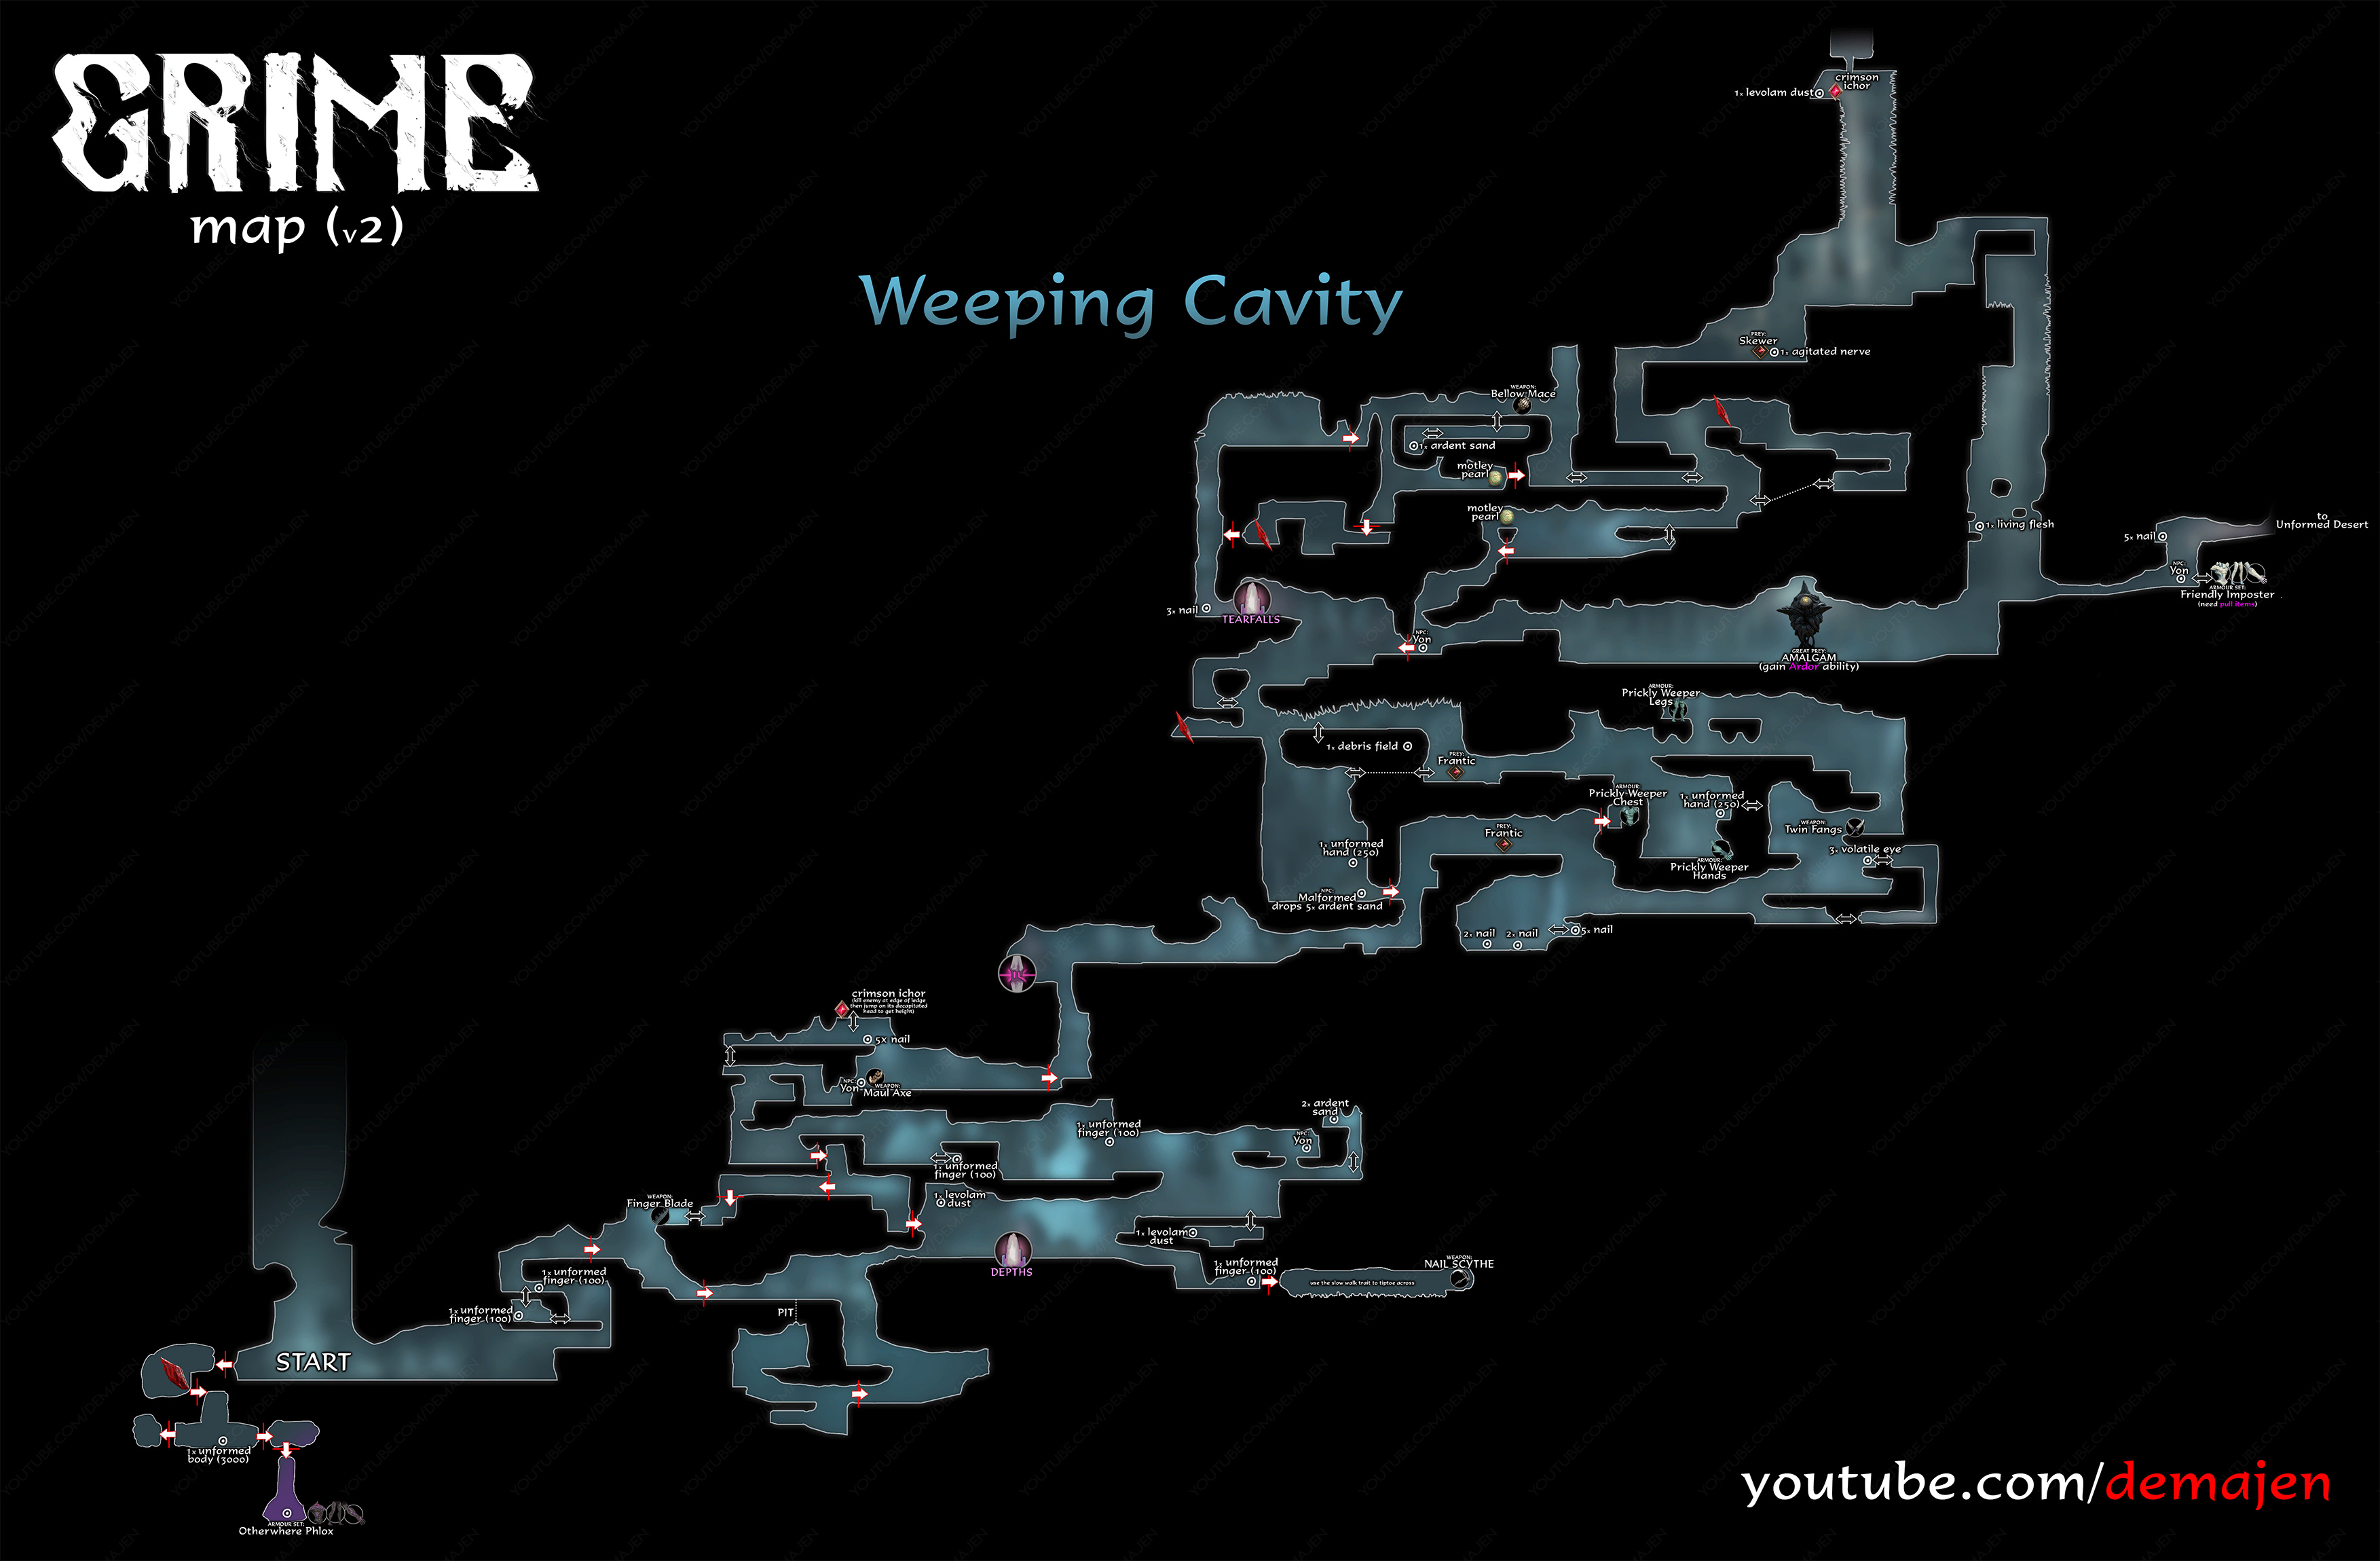 GRIME - All Maps in Game + All Checkpoint Locations - Weeping Cavity